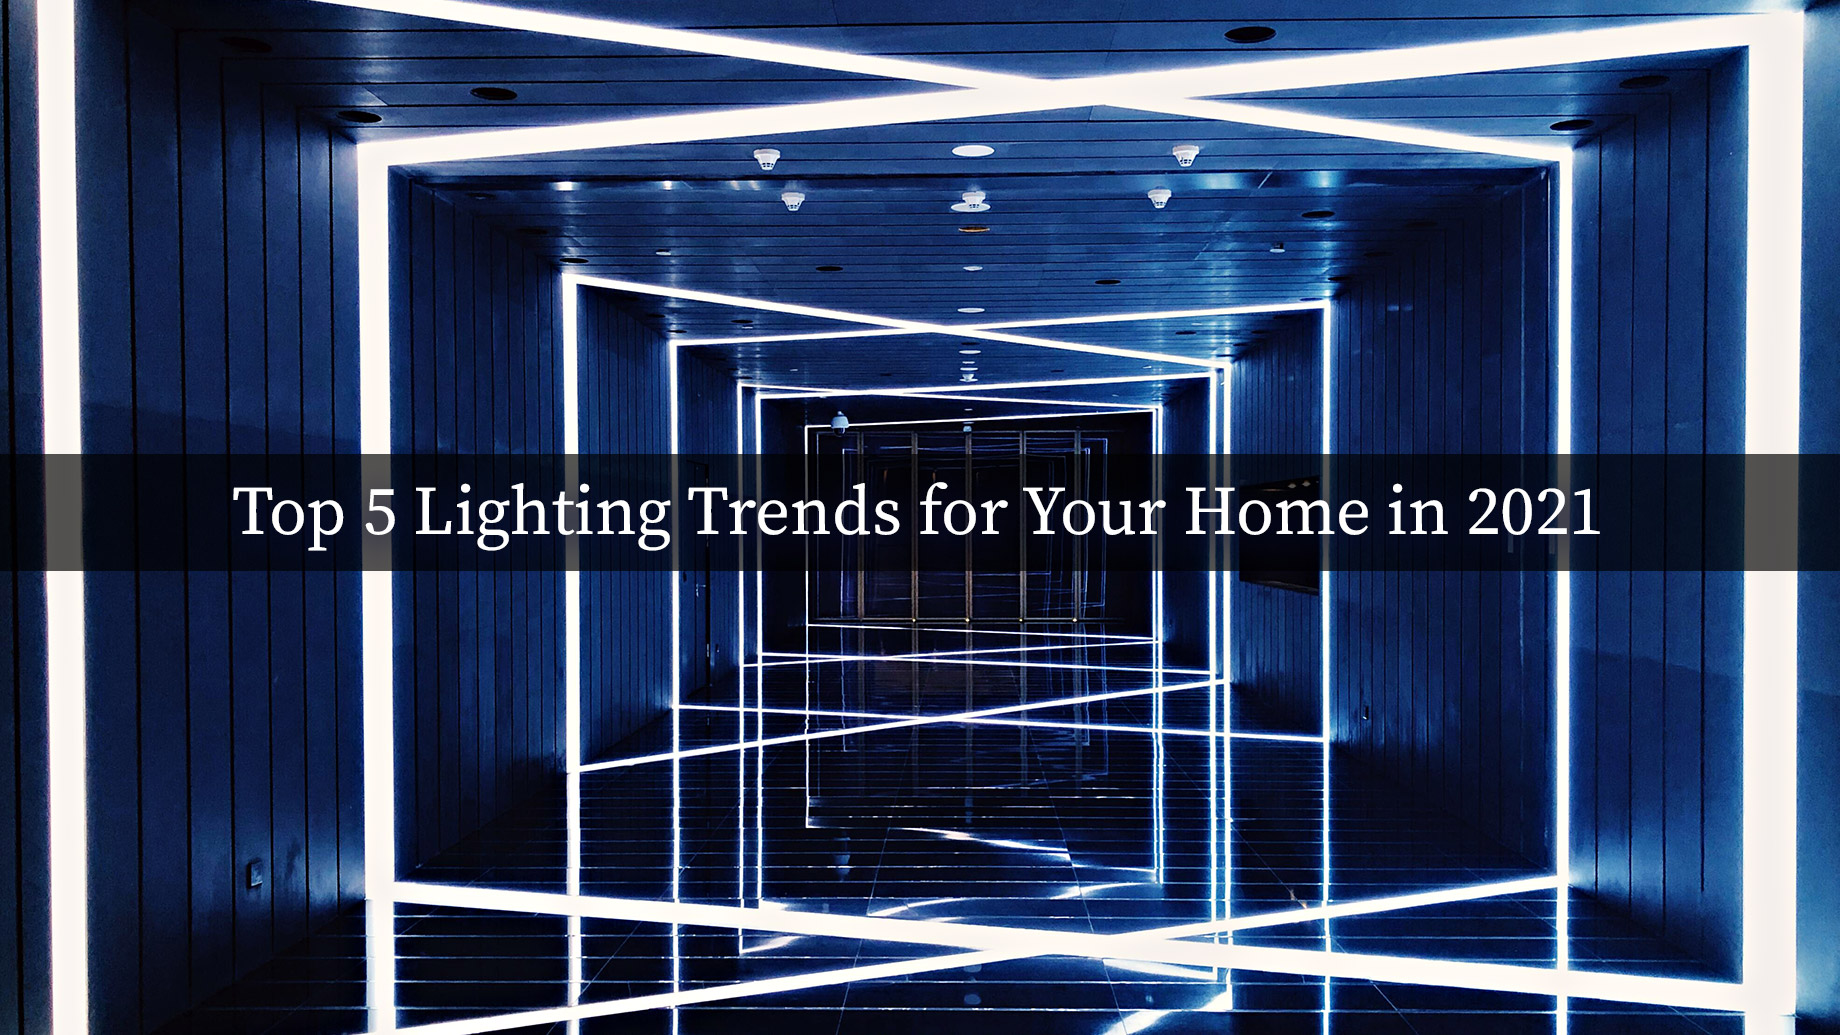 Top 5 Lighting Trends for Your Home in 2021